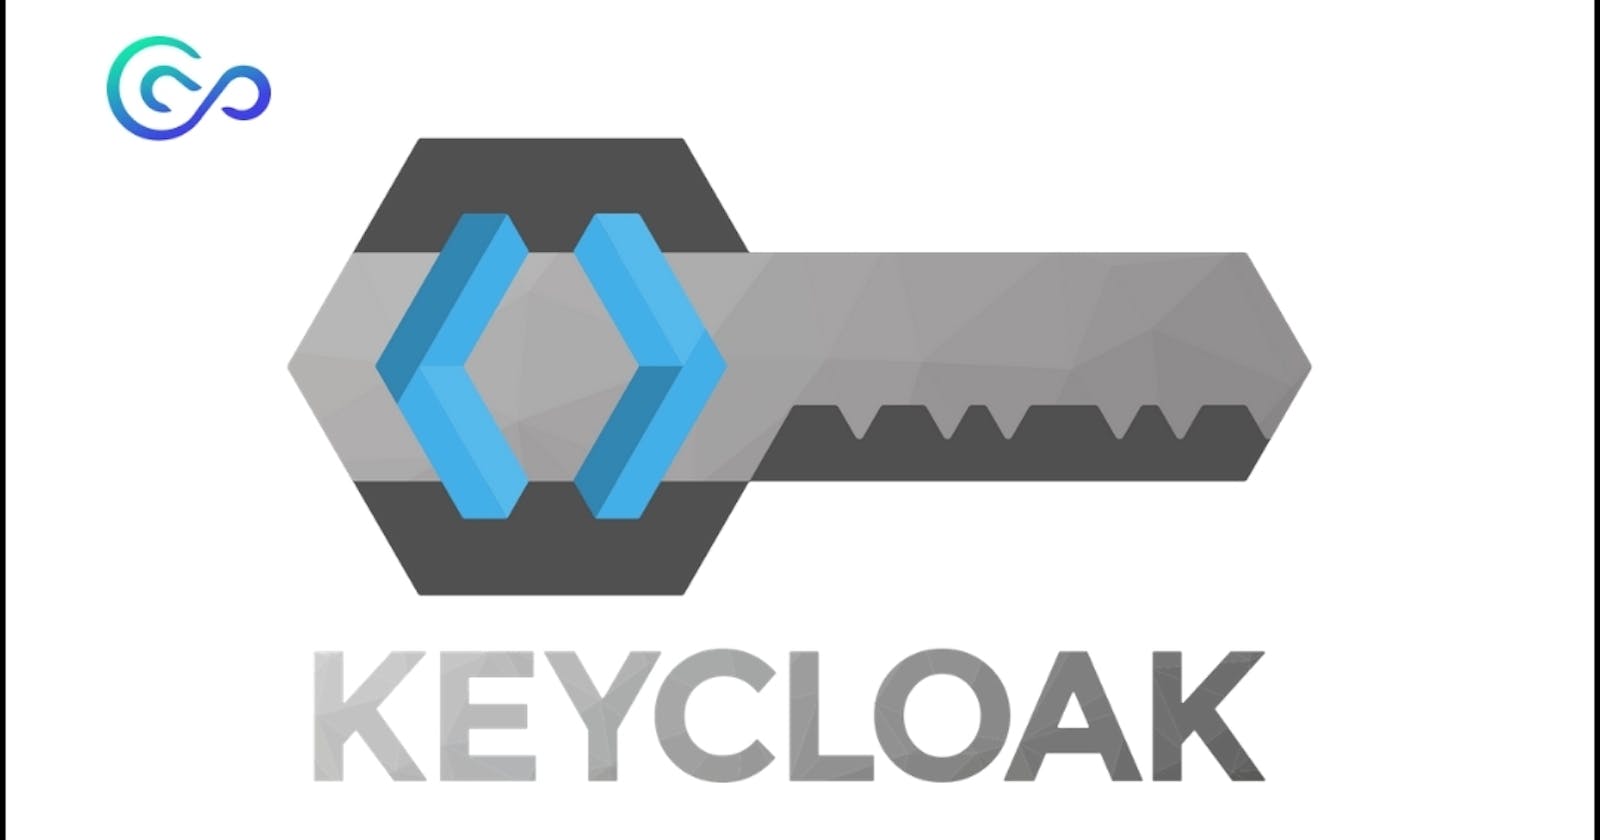 Keycloak: Your Key to Secure Access Control (and Why You Need It)